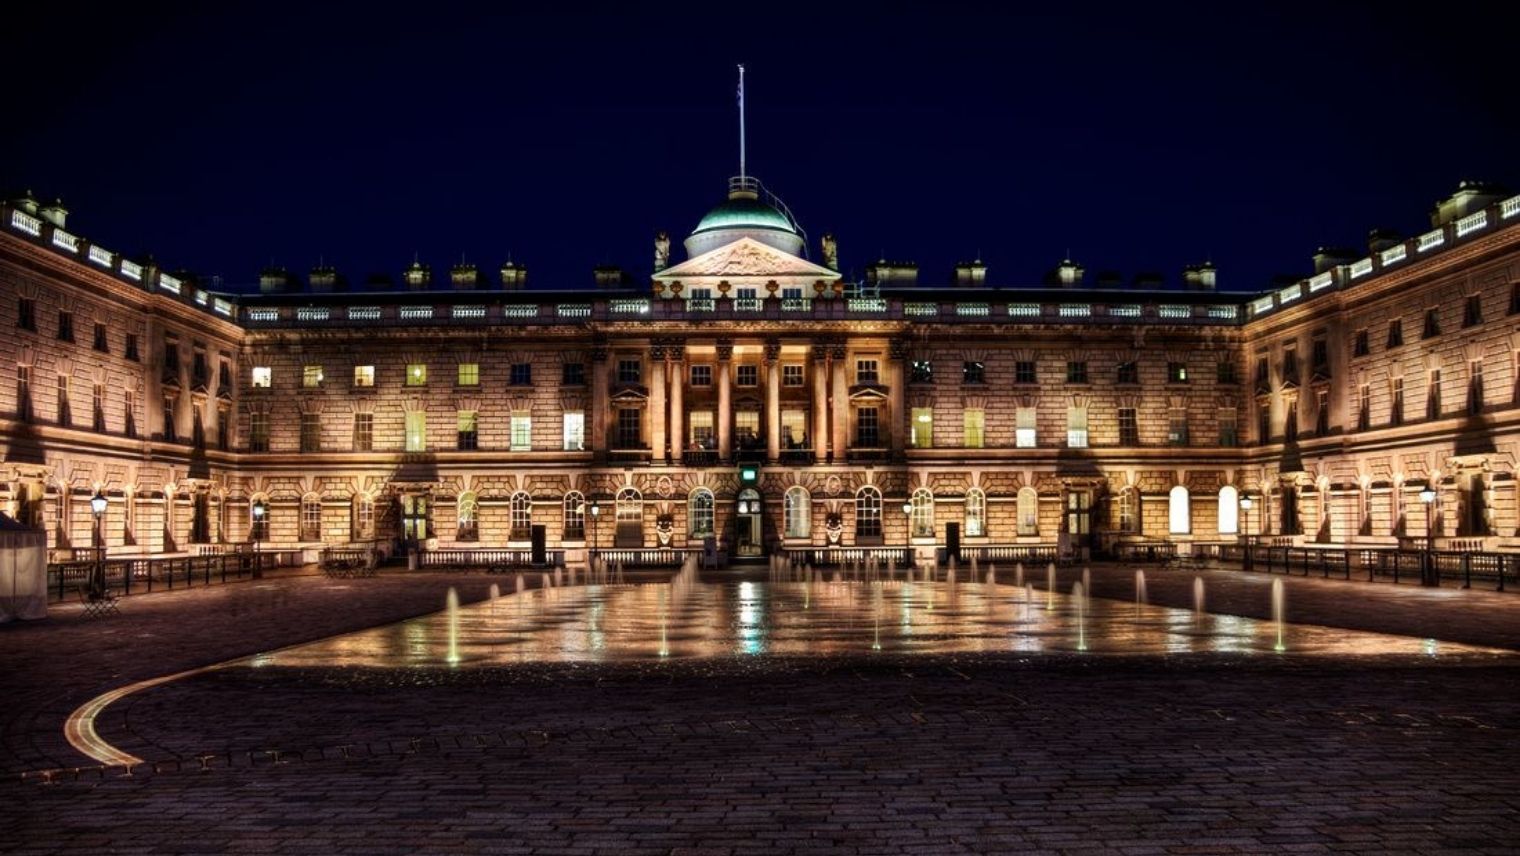 Exterior of Somerset House from the courtyard at night